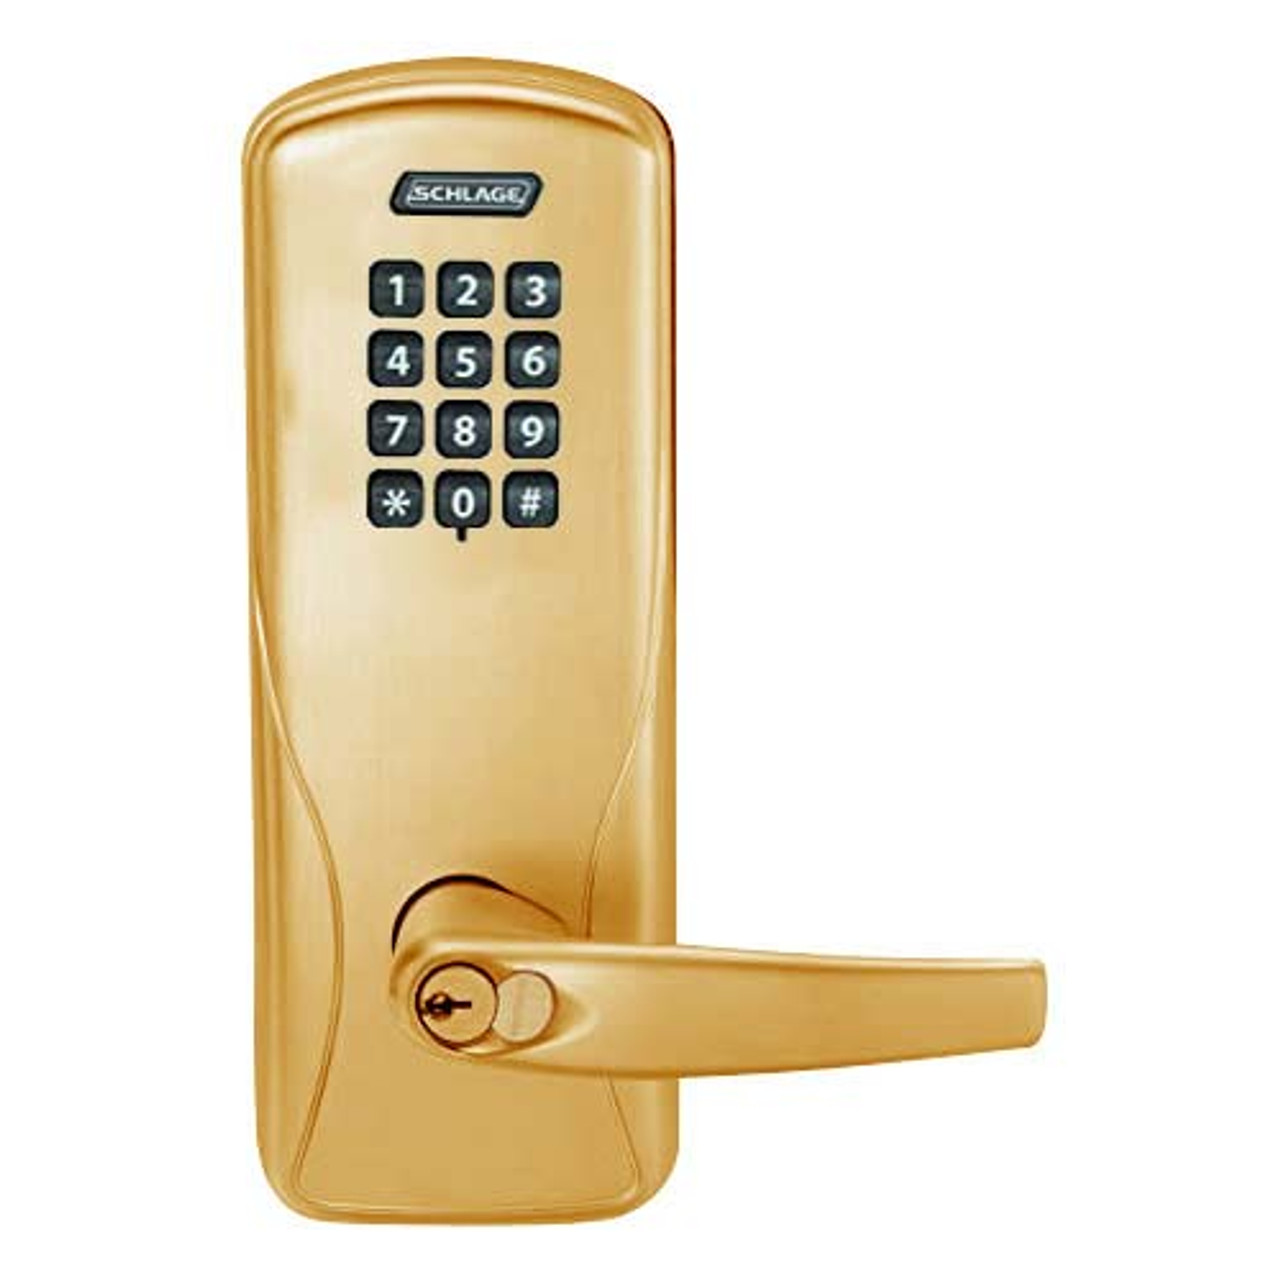 CO200-MD-40-KP-ATH-GD-29R-612 Mortise Deadbolt Standalone Electronic Keypad Locks in Satin Bronze